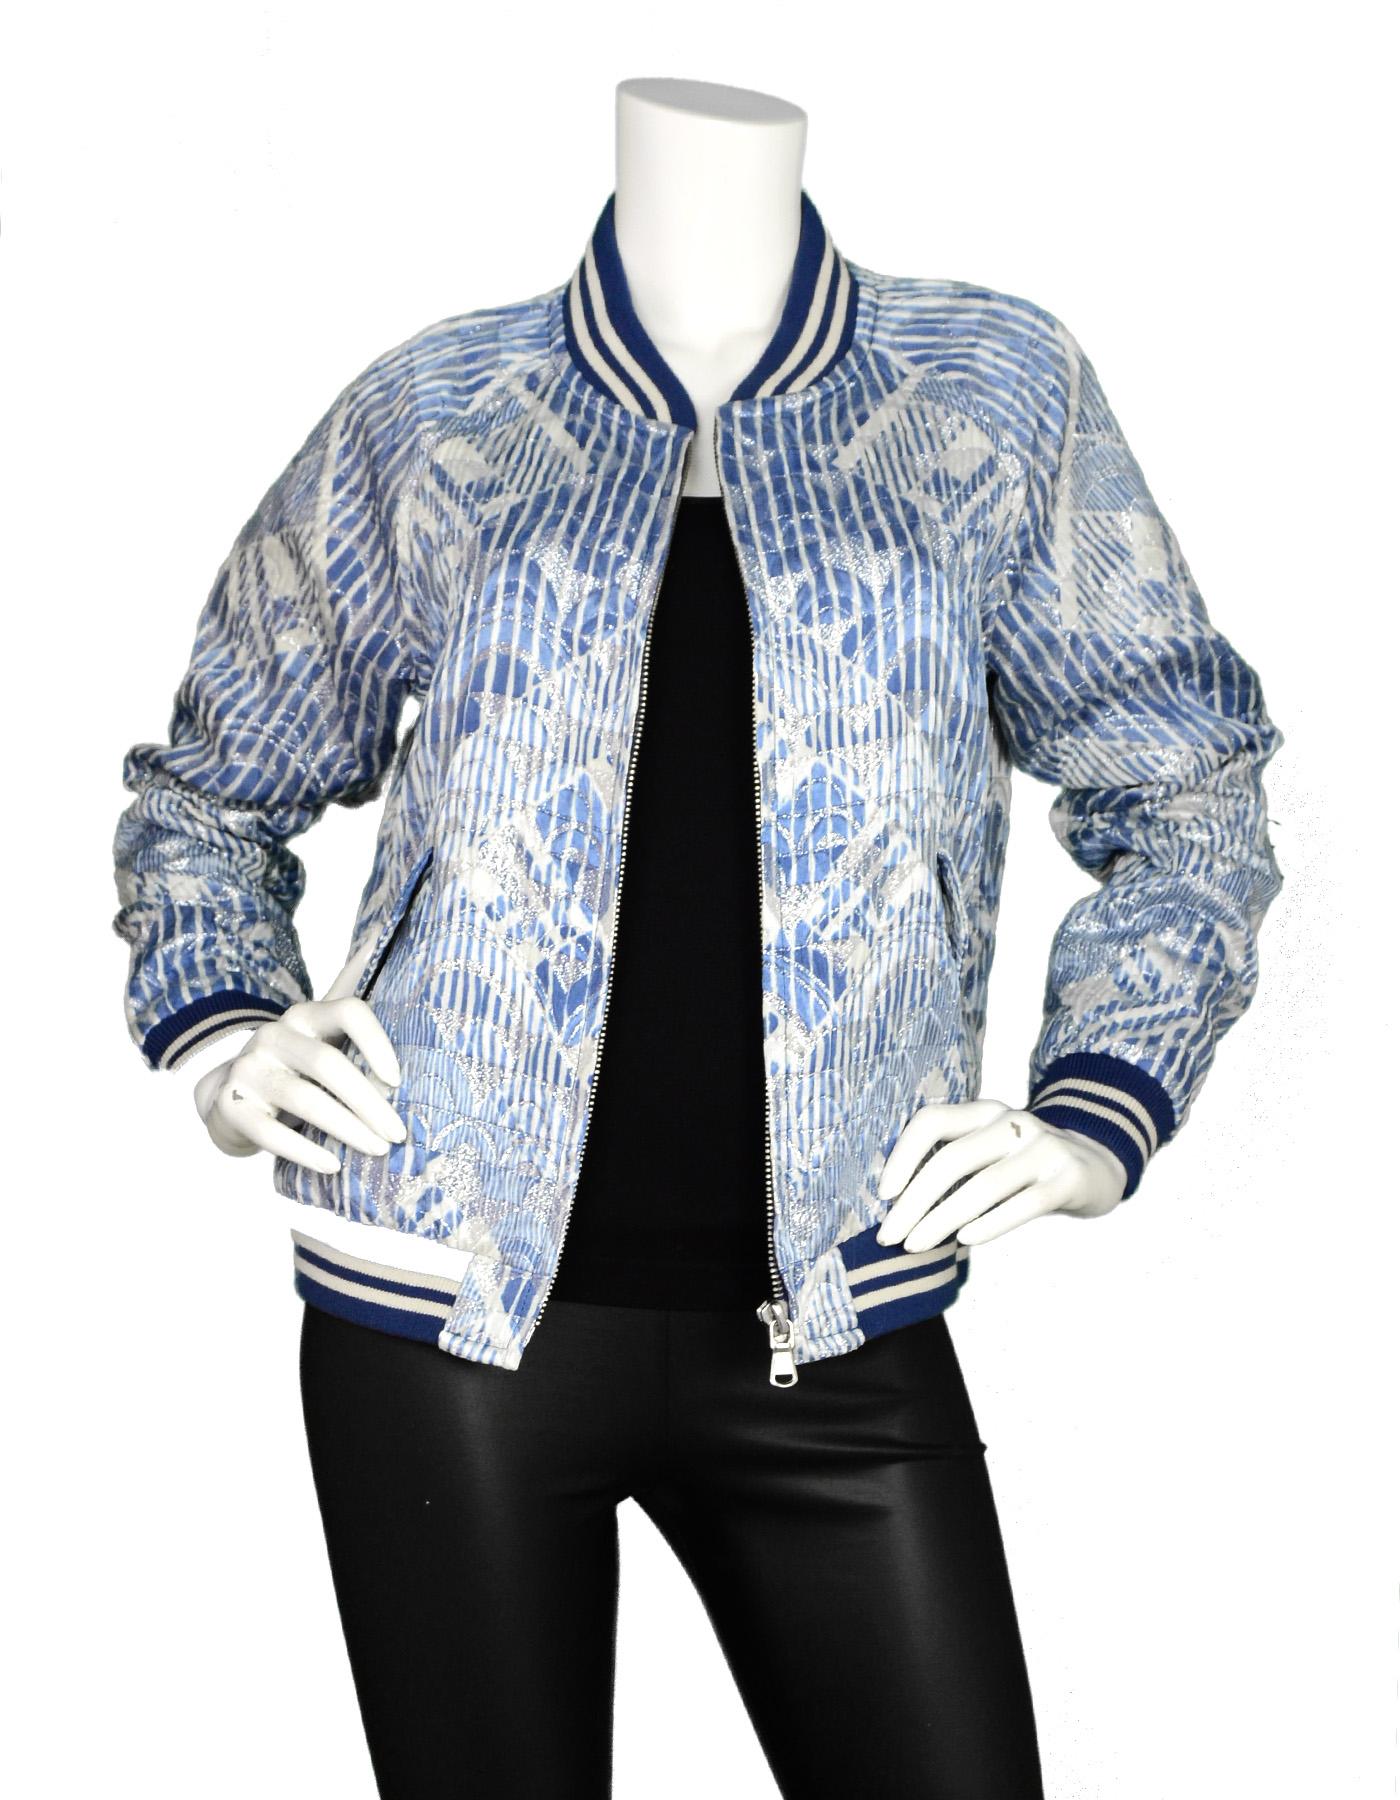 Marc Jacobs NWT Blue/White Nylon Glitter Bomber Jacket Sz M

Made In: Poland
Color: Blue/white
Materials: 95% polyester and 5% nylon
Lining: 100% polyester
Opening/Closure: Zipper front
Overall Condition: New with original tags condition 
Estimated